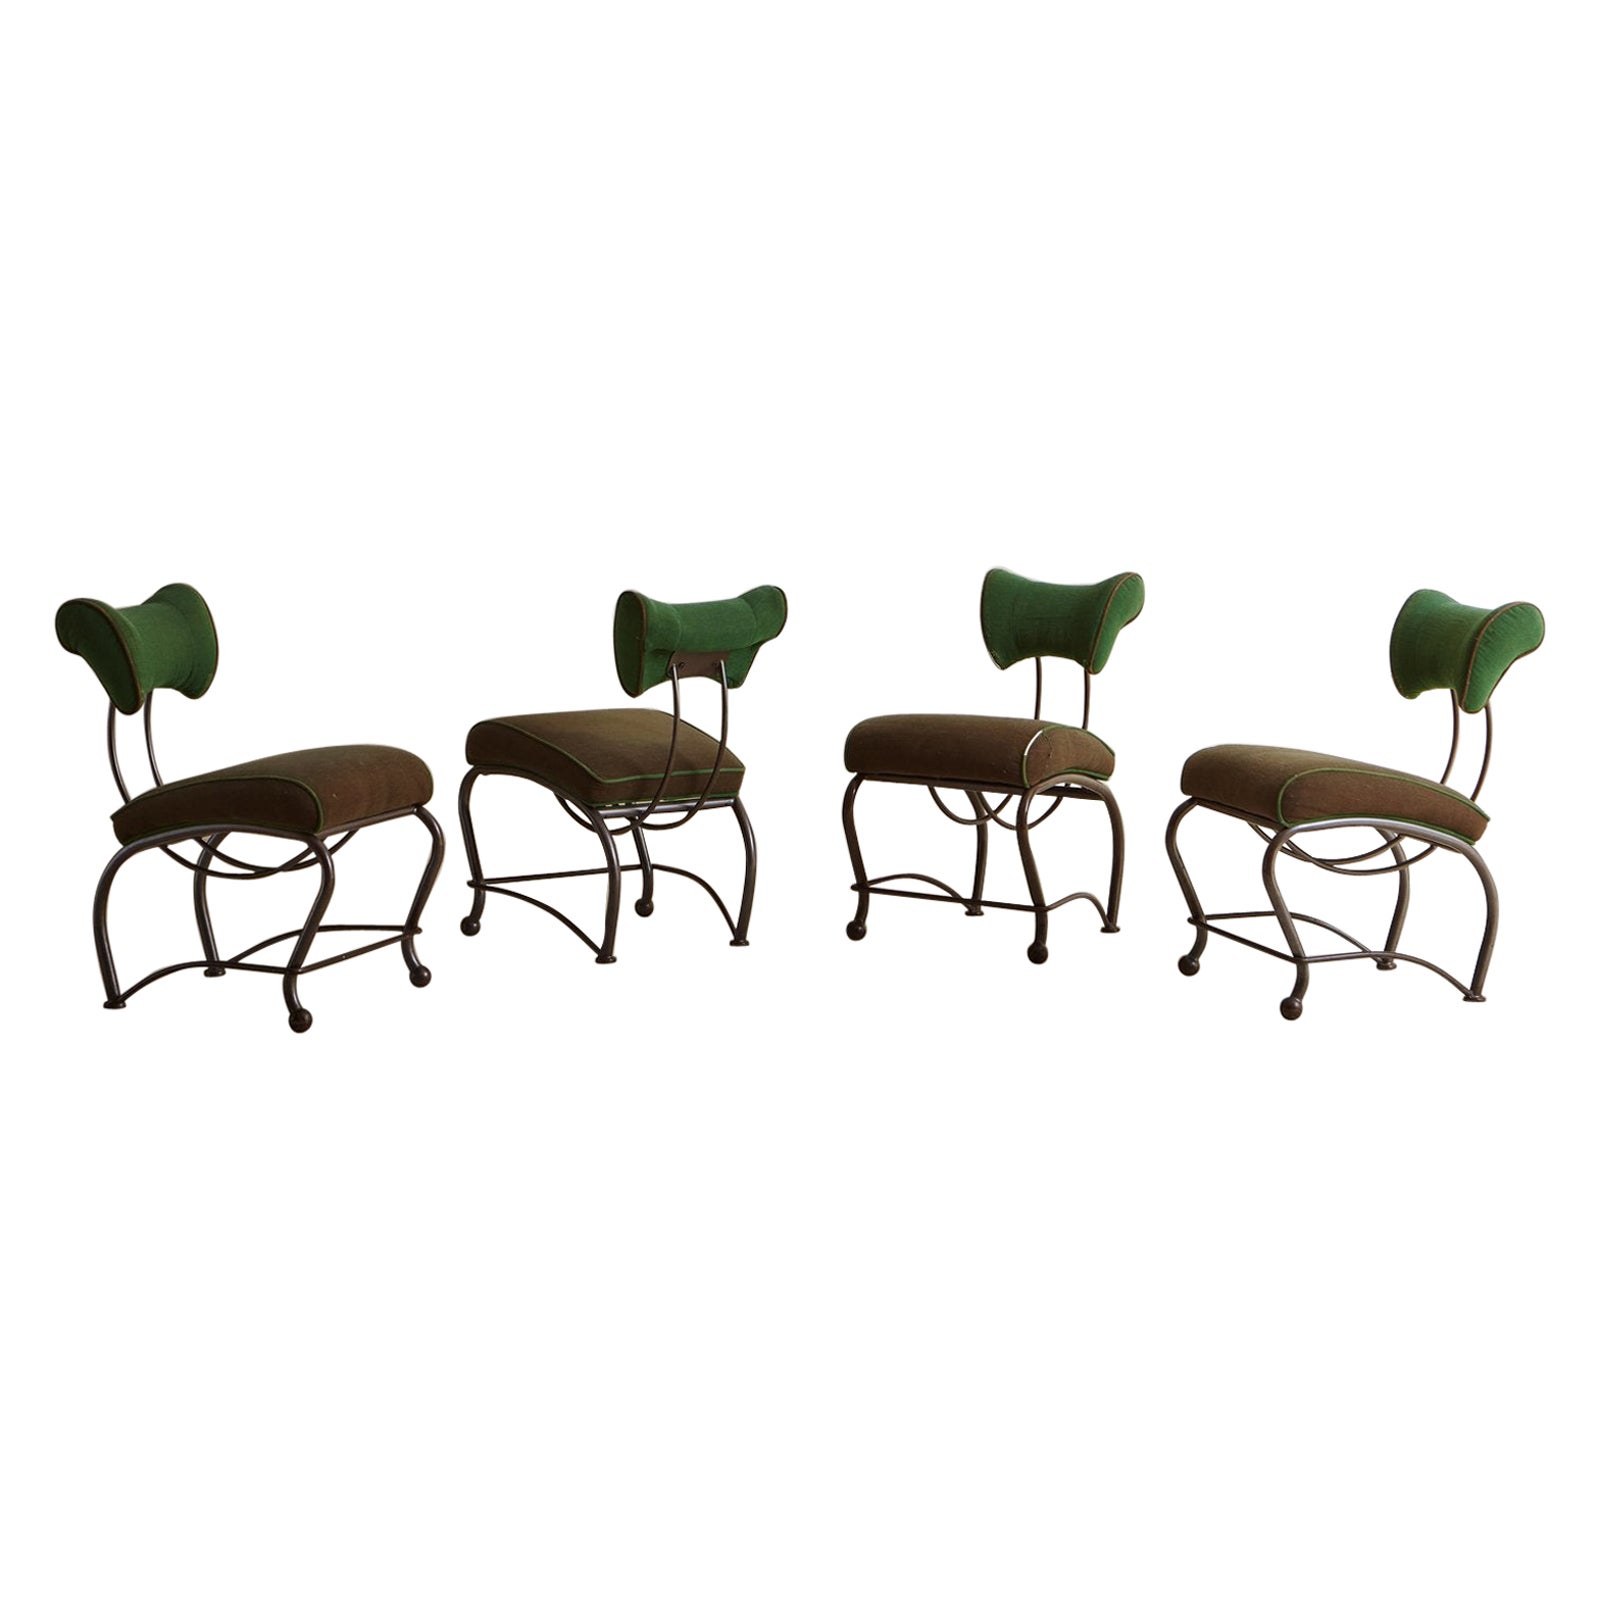 Set of 4 Elbert Chairs by Jordan Mozer for Shelby Williams Industries, USA 1990s